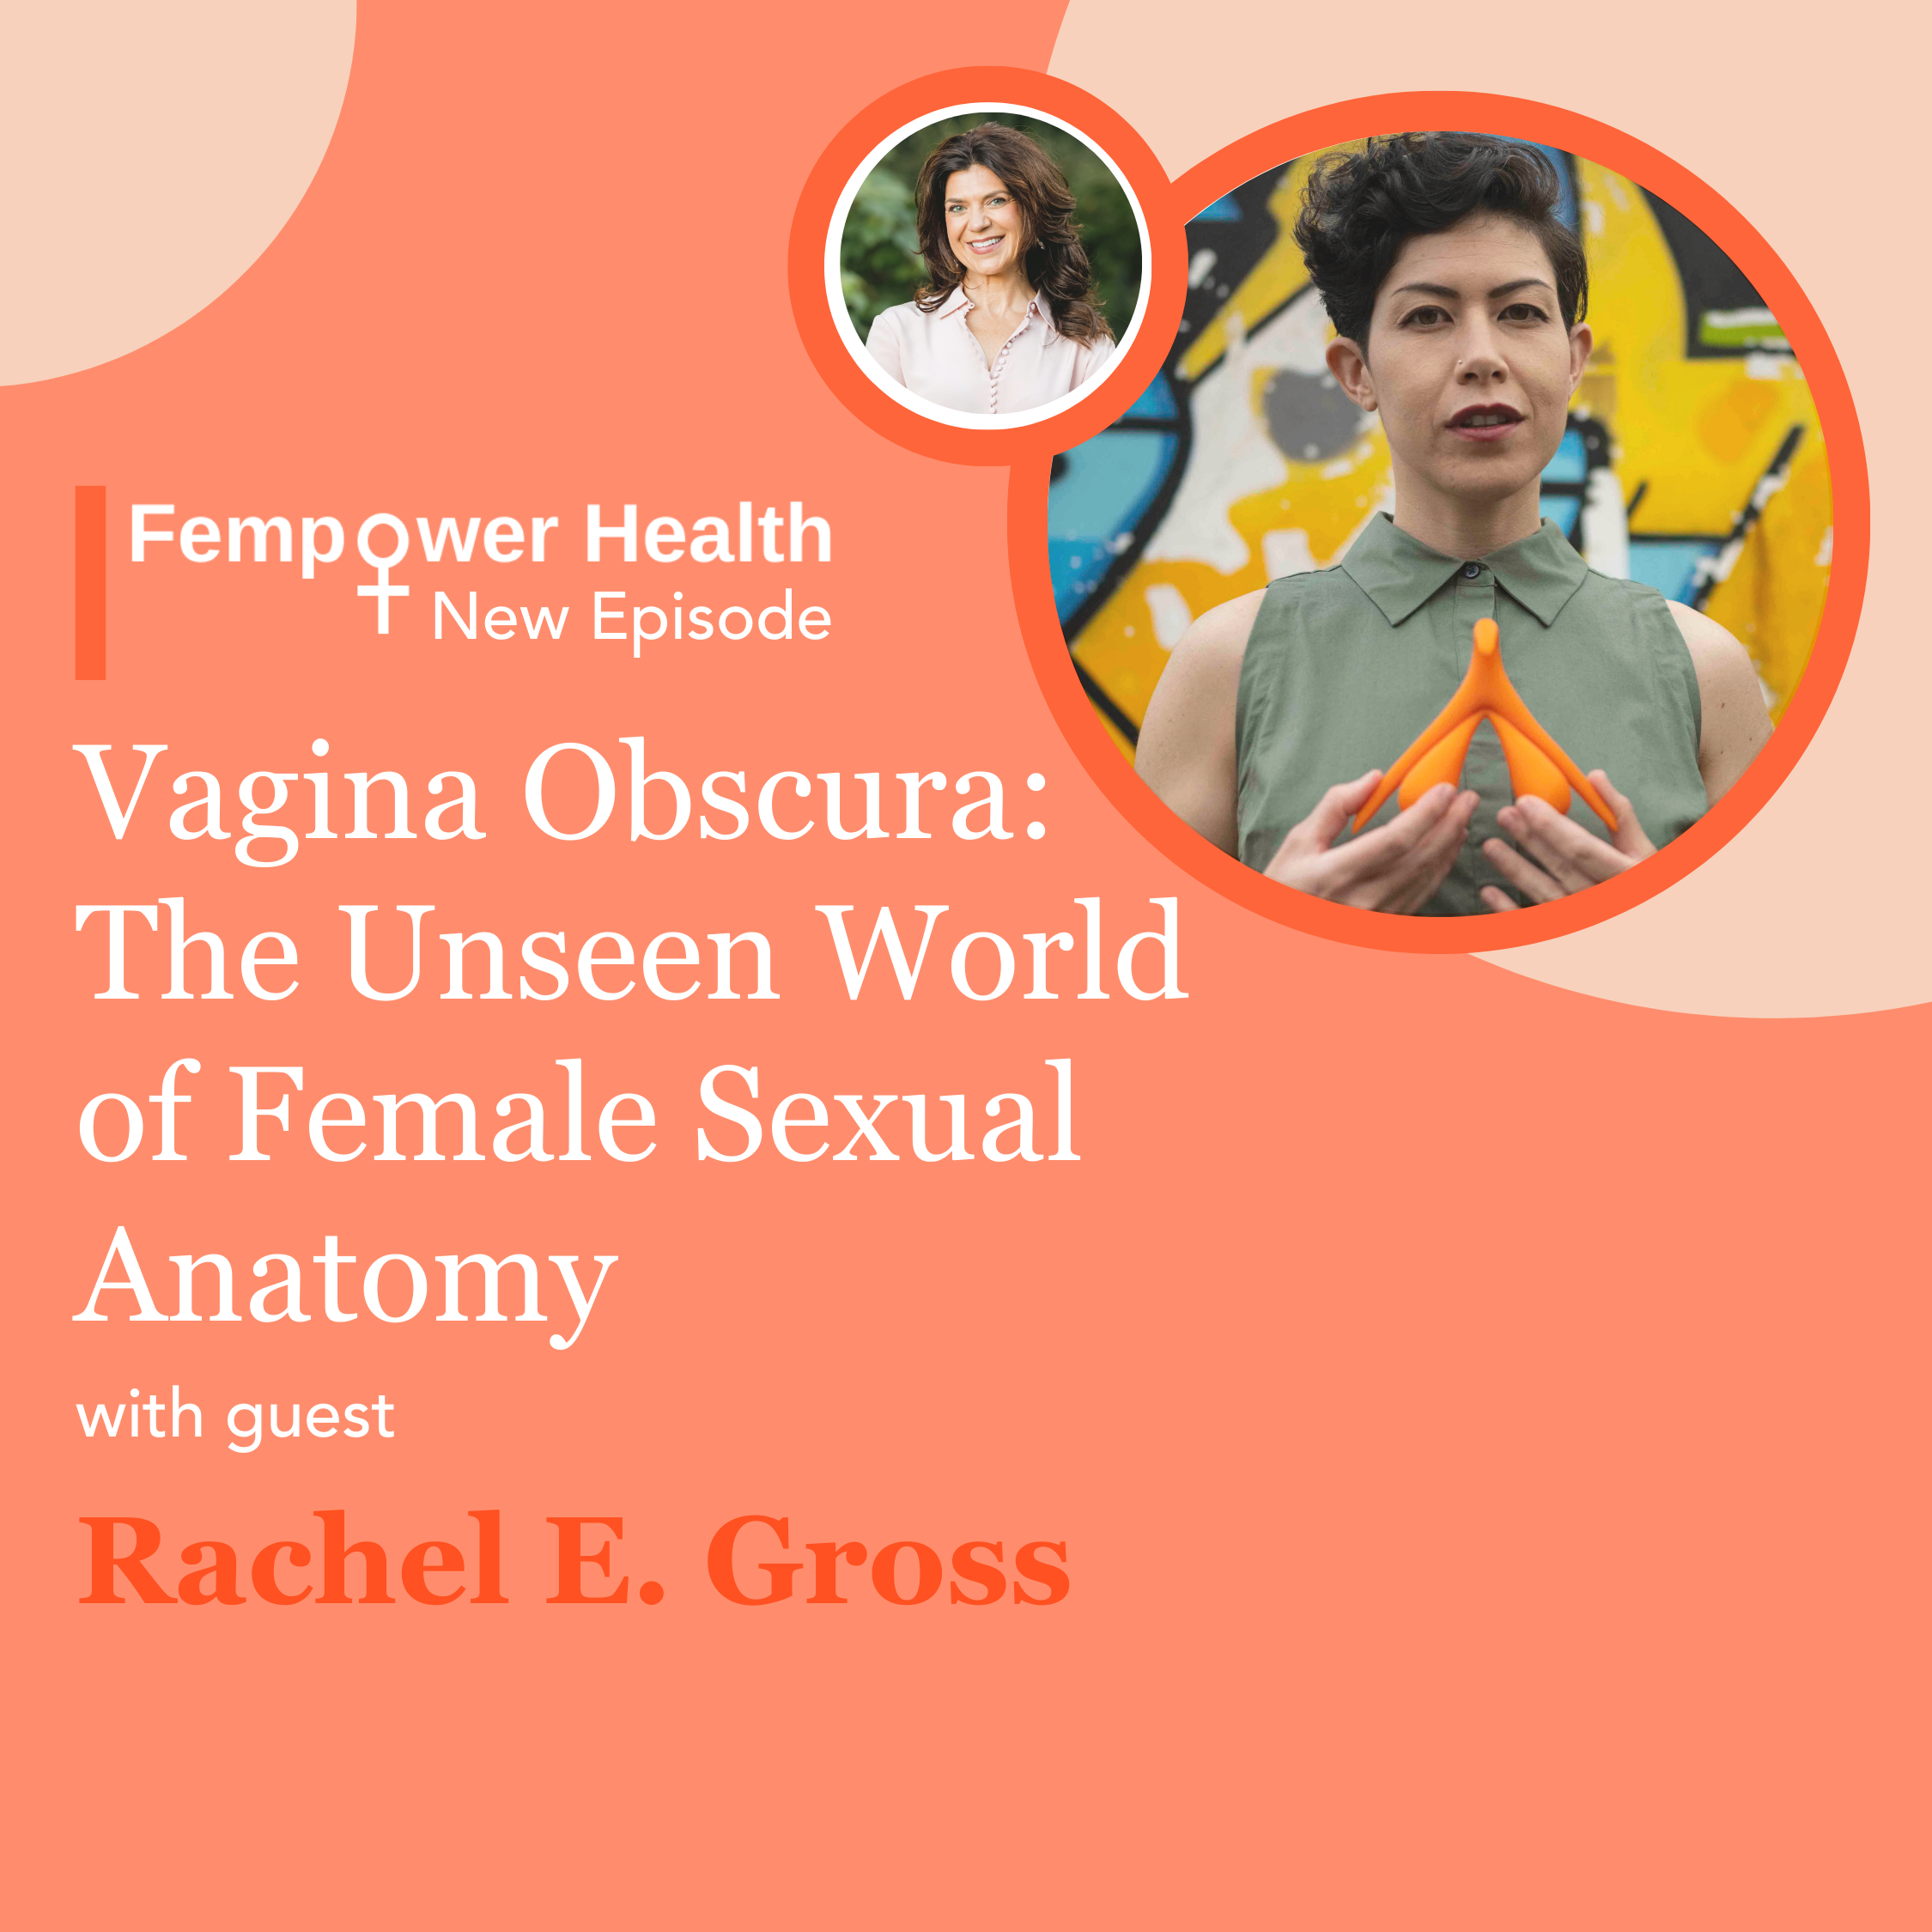 Vagina Obscura: The Unseen World of Female Sexual Anatomy | Rachel E. Gross